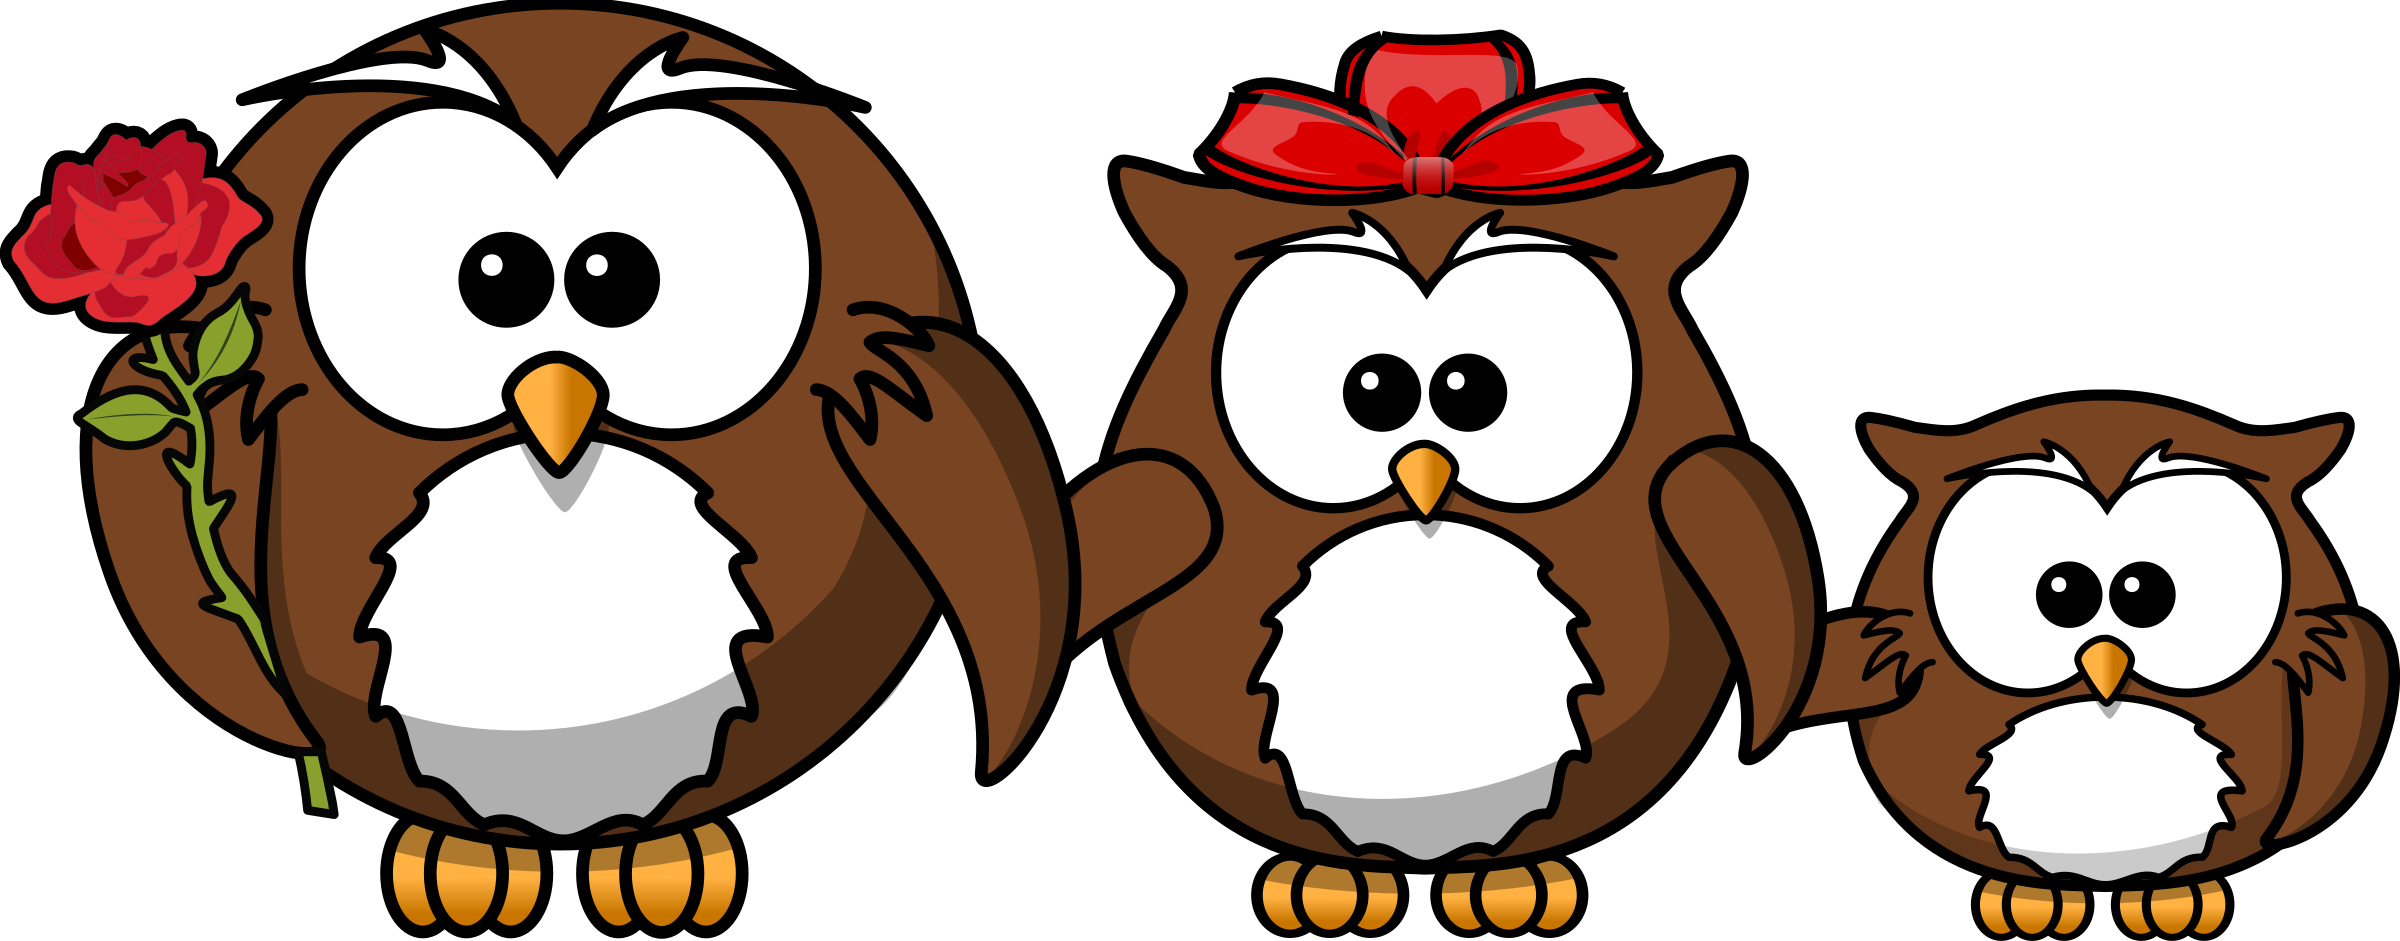 Of owls big image. Clipart family owl